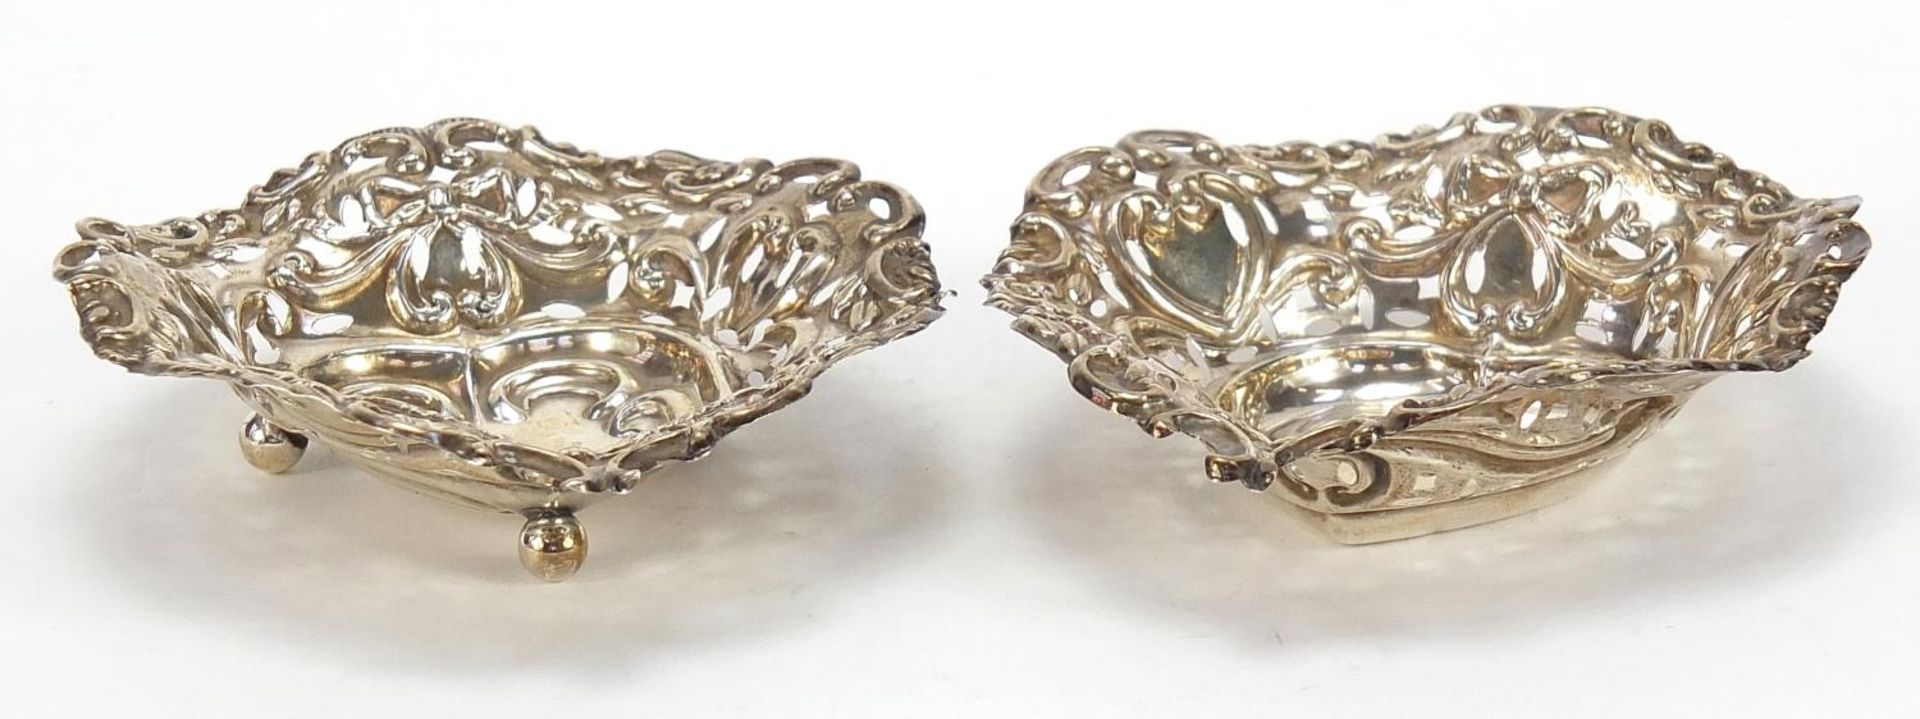 M Bros, two Victorian silver love heart dishes, pierced and embossed with swags and bows, Birmingham